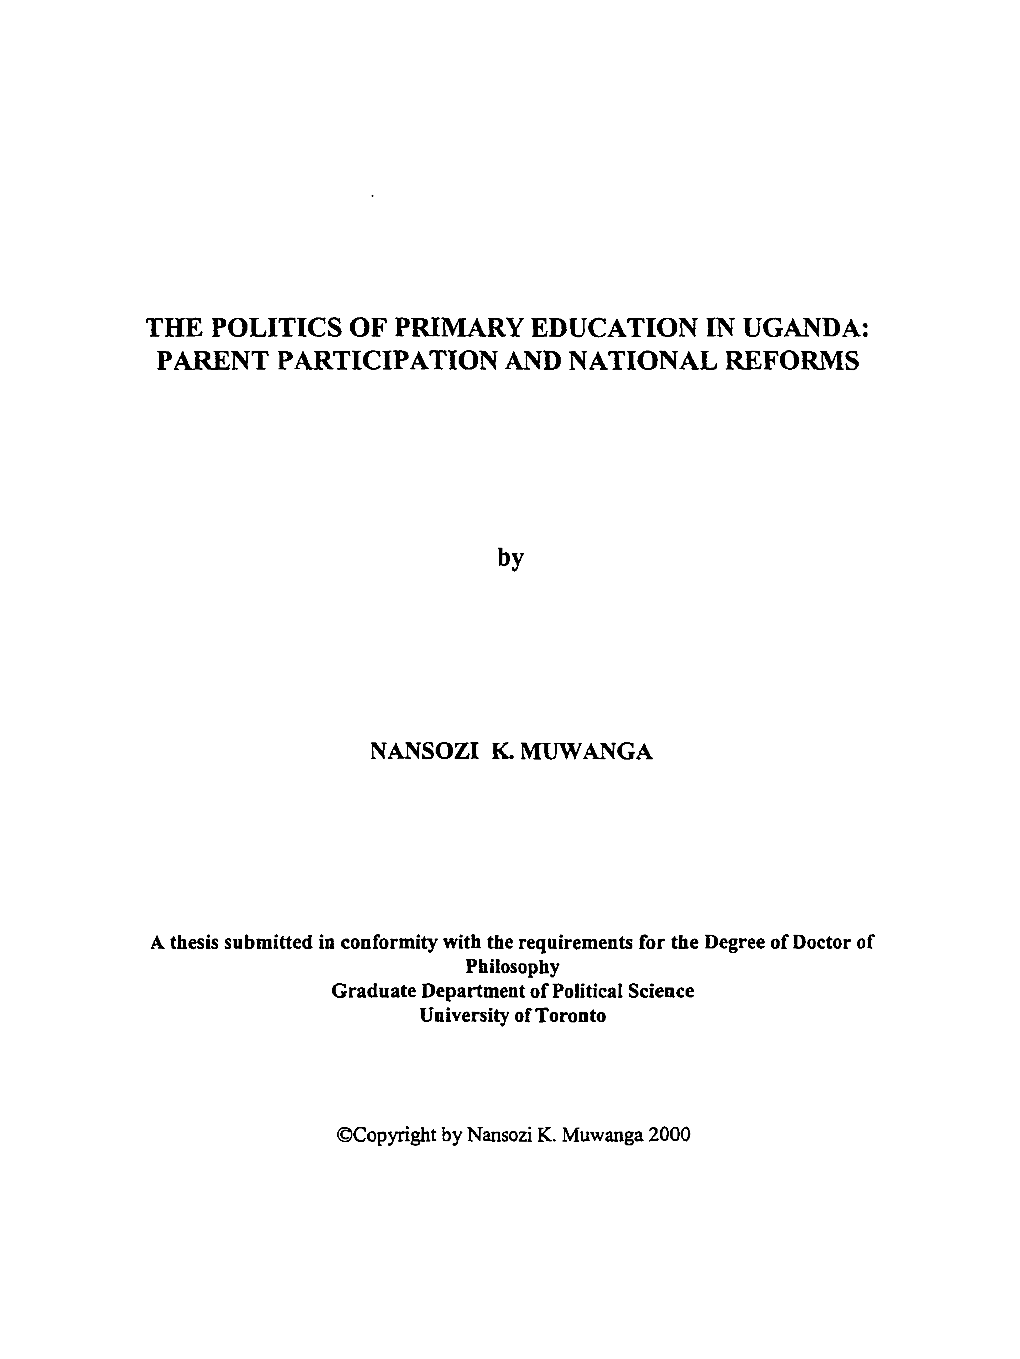 The Politics of Primary Education in Uganda: Parent Participation and National Reforms